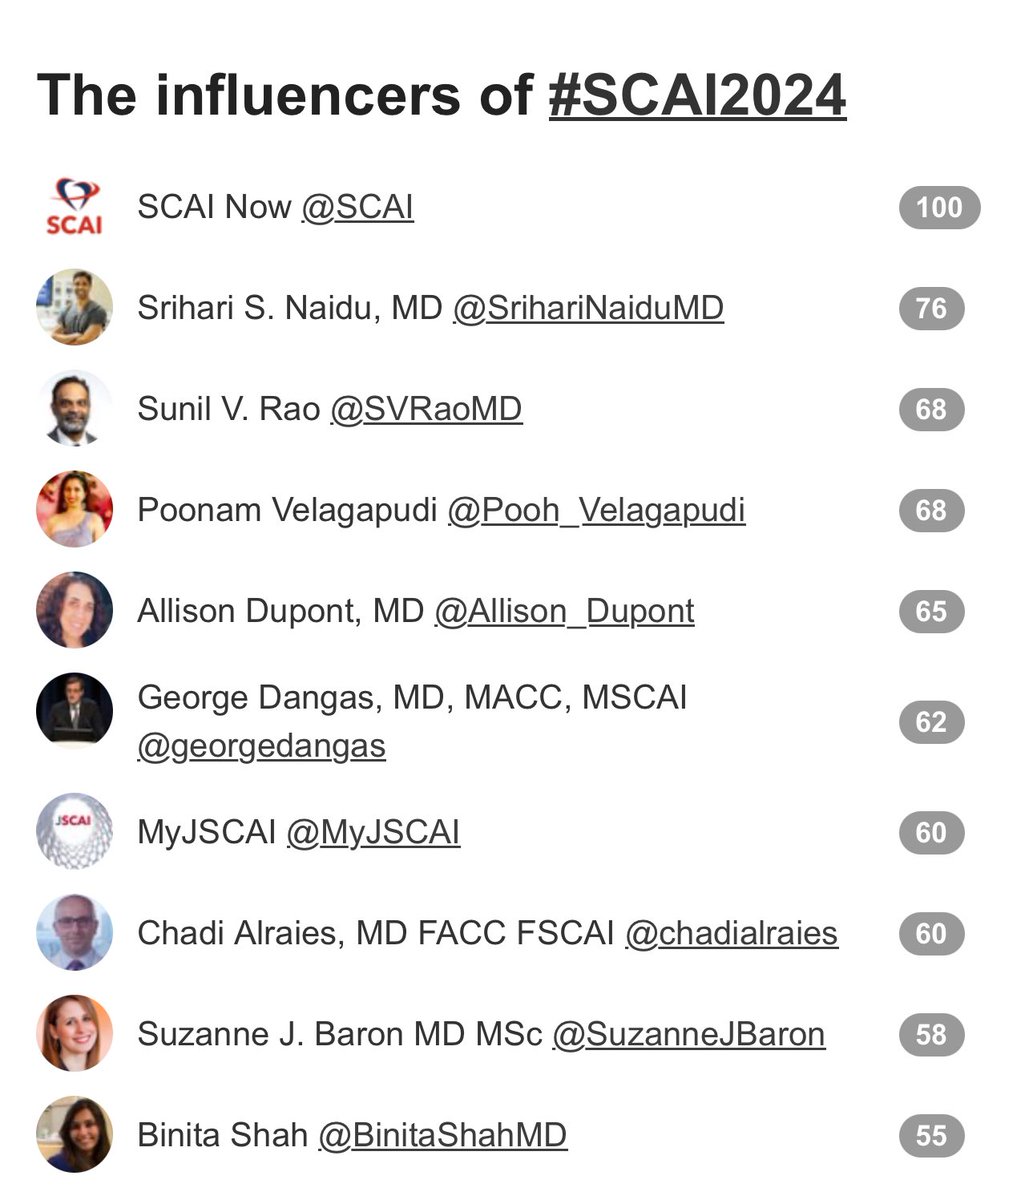 #SCAI2024 #SoMe ambassadors & SoMe participants had a grt time tweeting science from the meeting!! Tq @SCAI for the opportunity 2b a part of this! @scaiwin #ACCEarlyCareer #ACCFIT #ACCIC #ACCWIC @Vetrovec @_WayneBatchelor @anna_bortnick @HadleyWilsonMD @georgedangas @JDawnAbbott1